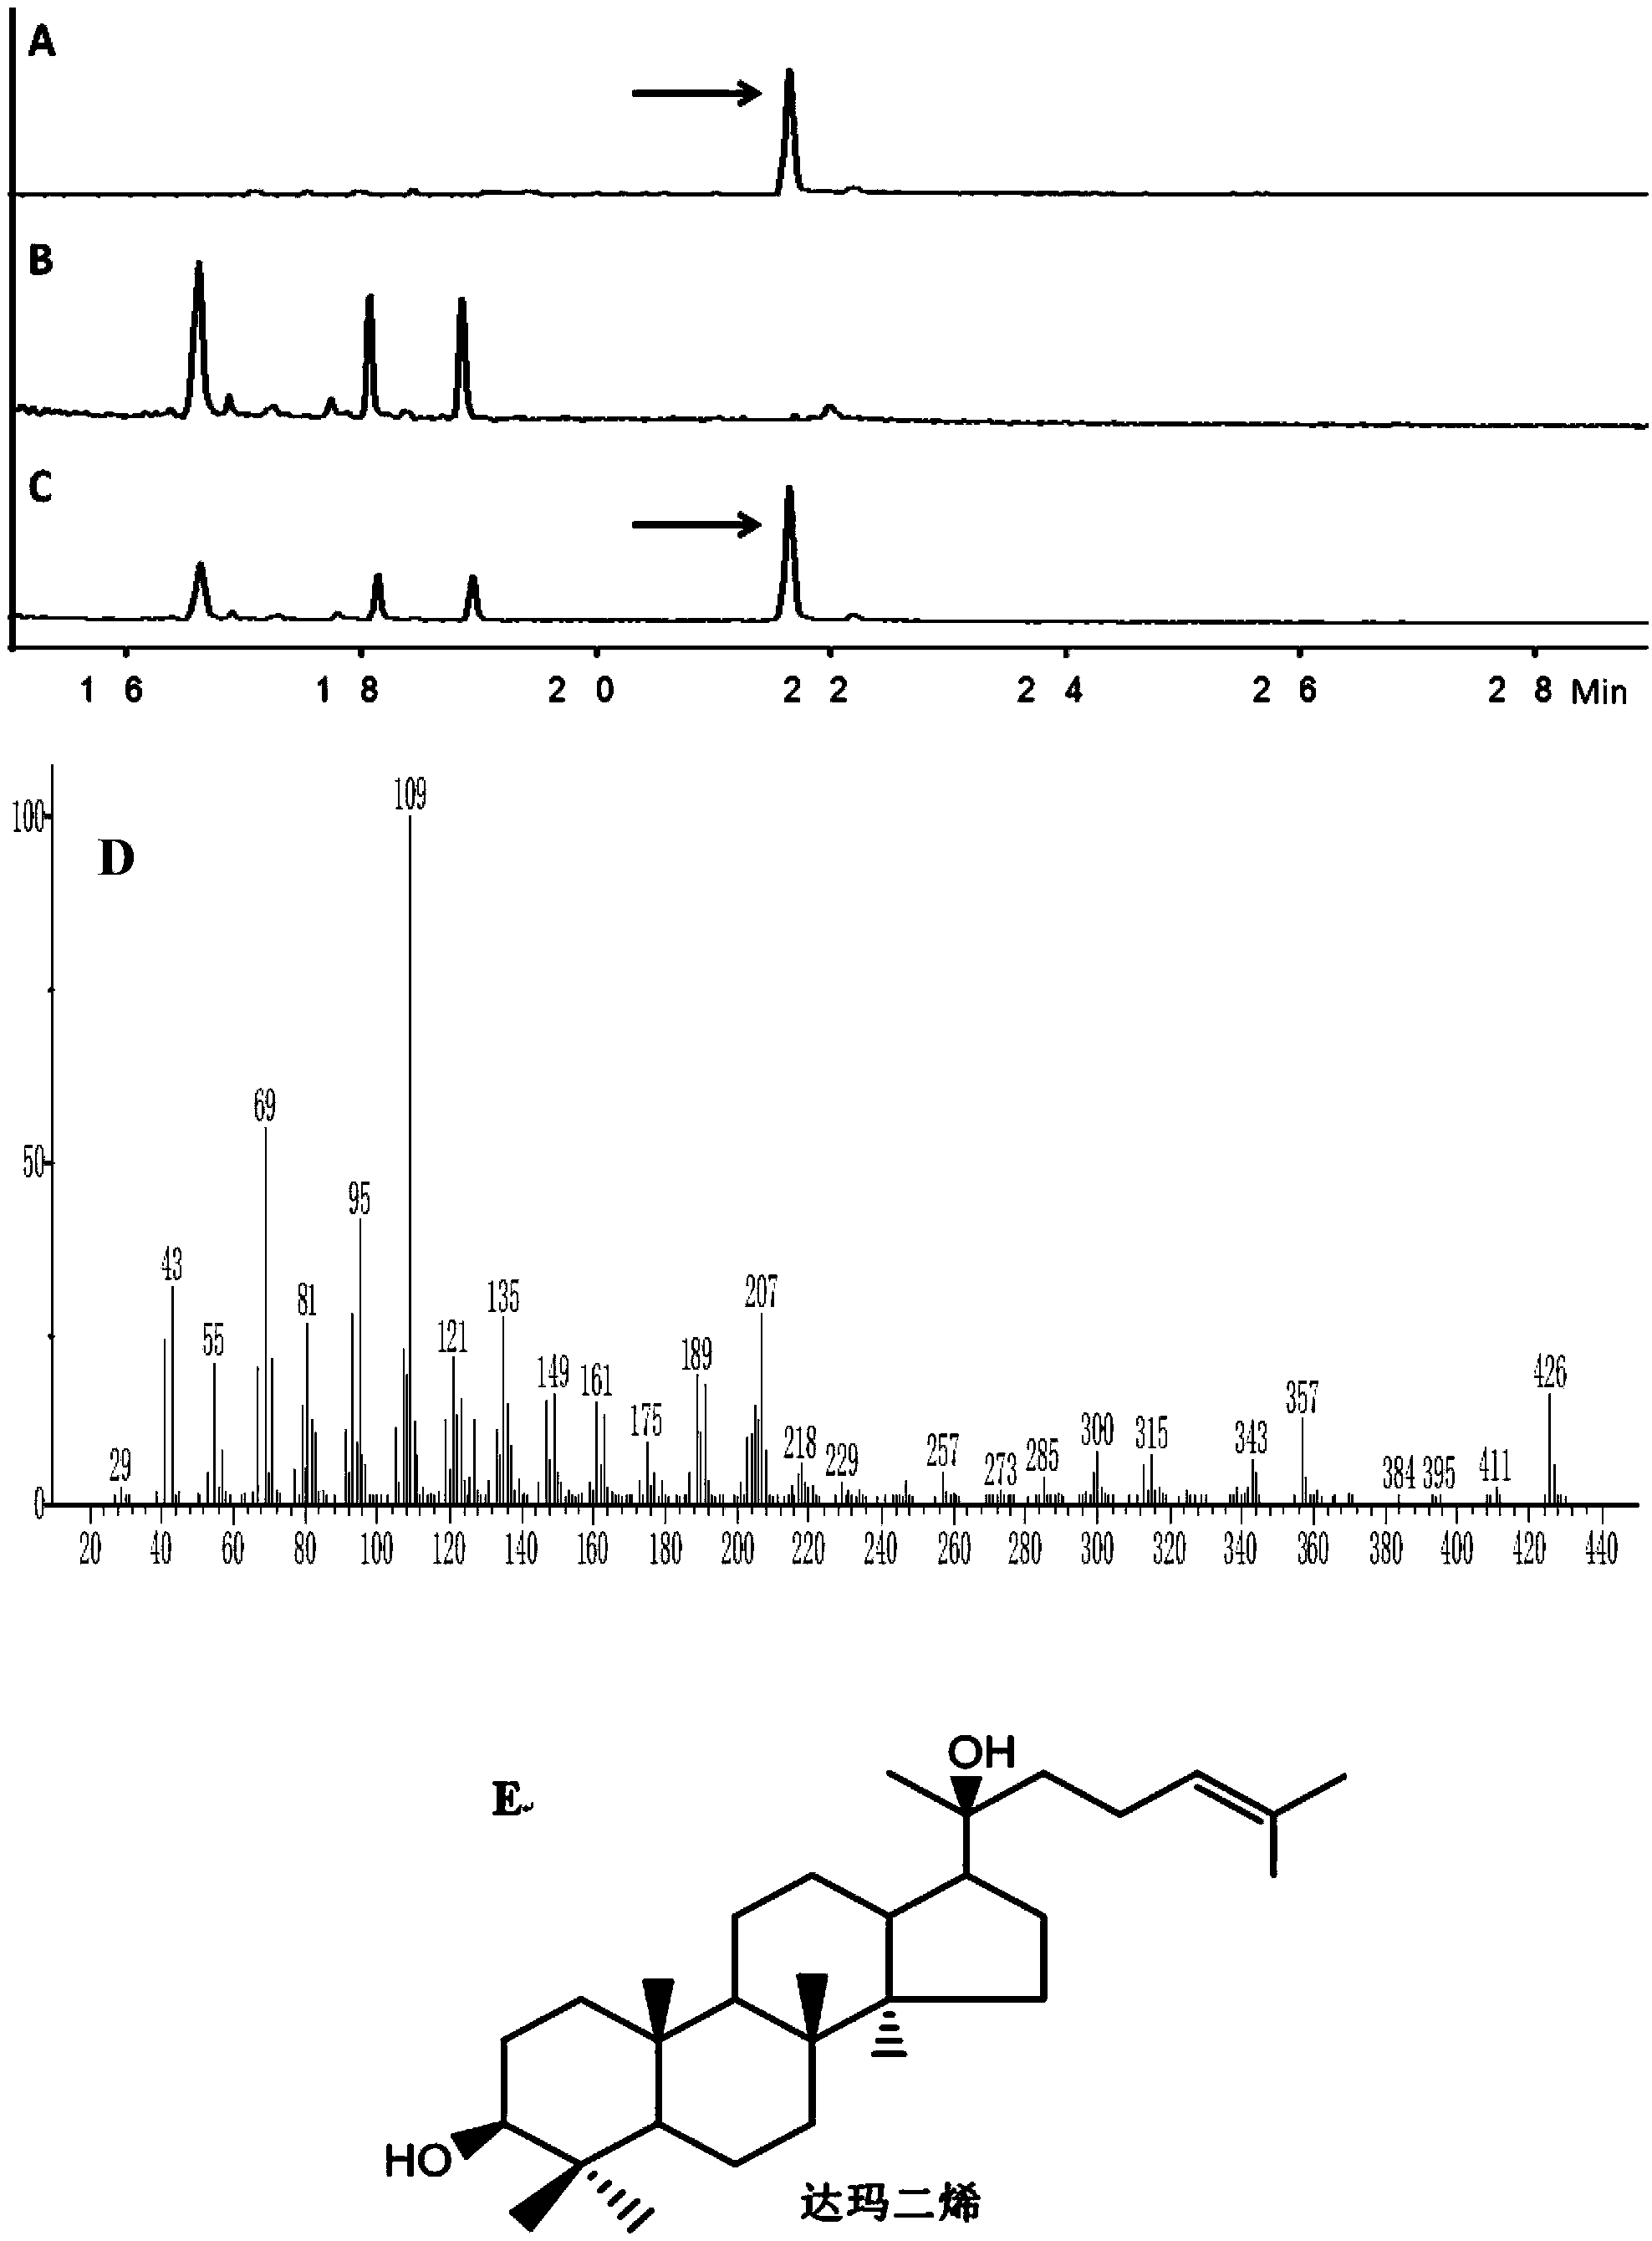 Recombinant microorganism for preparing dharma diene and protopanoxadiol and construction method thereof